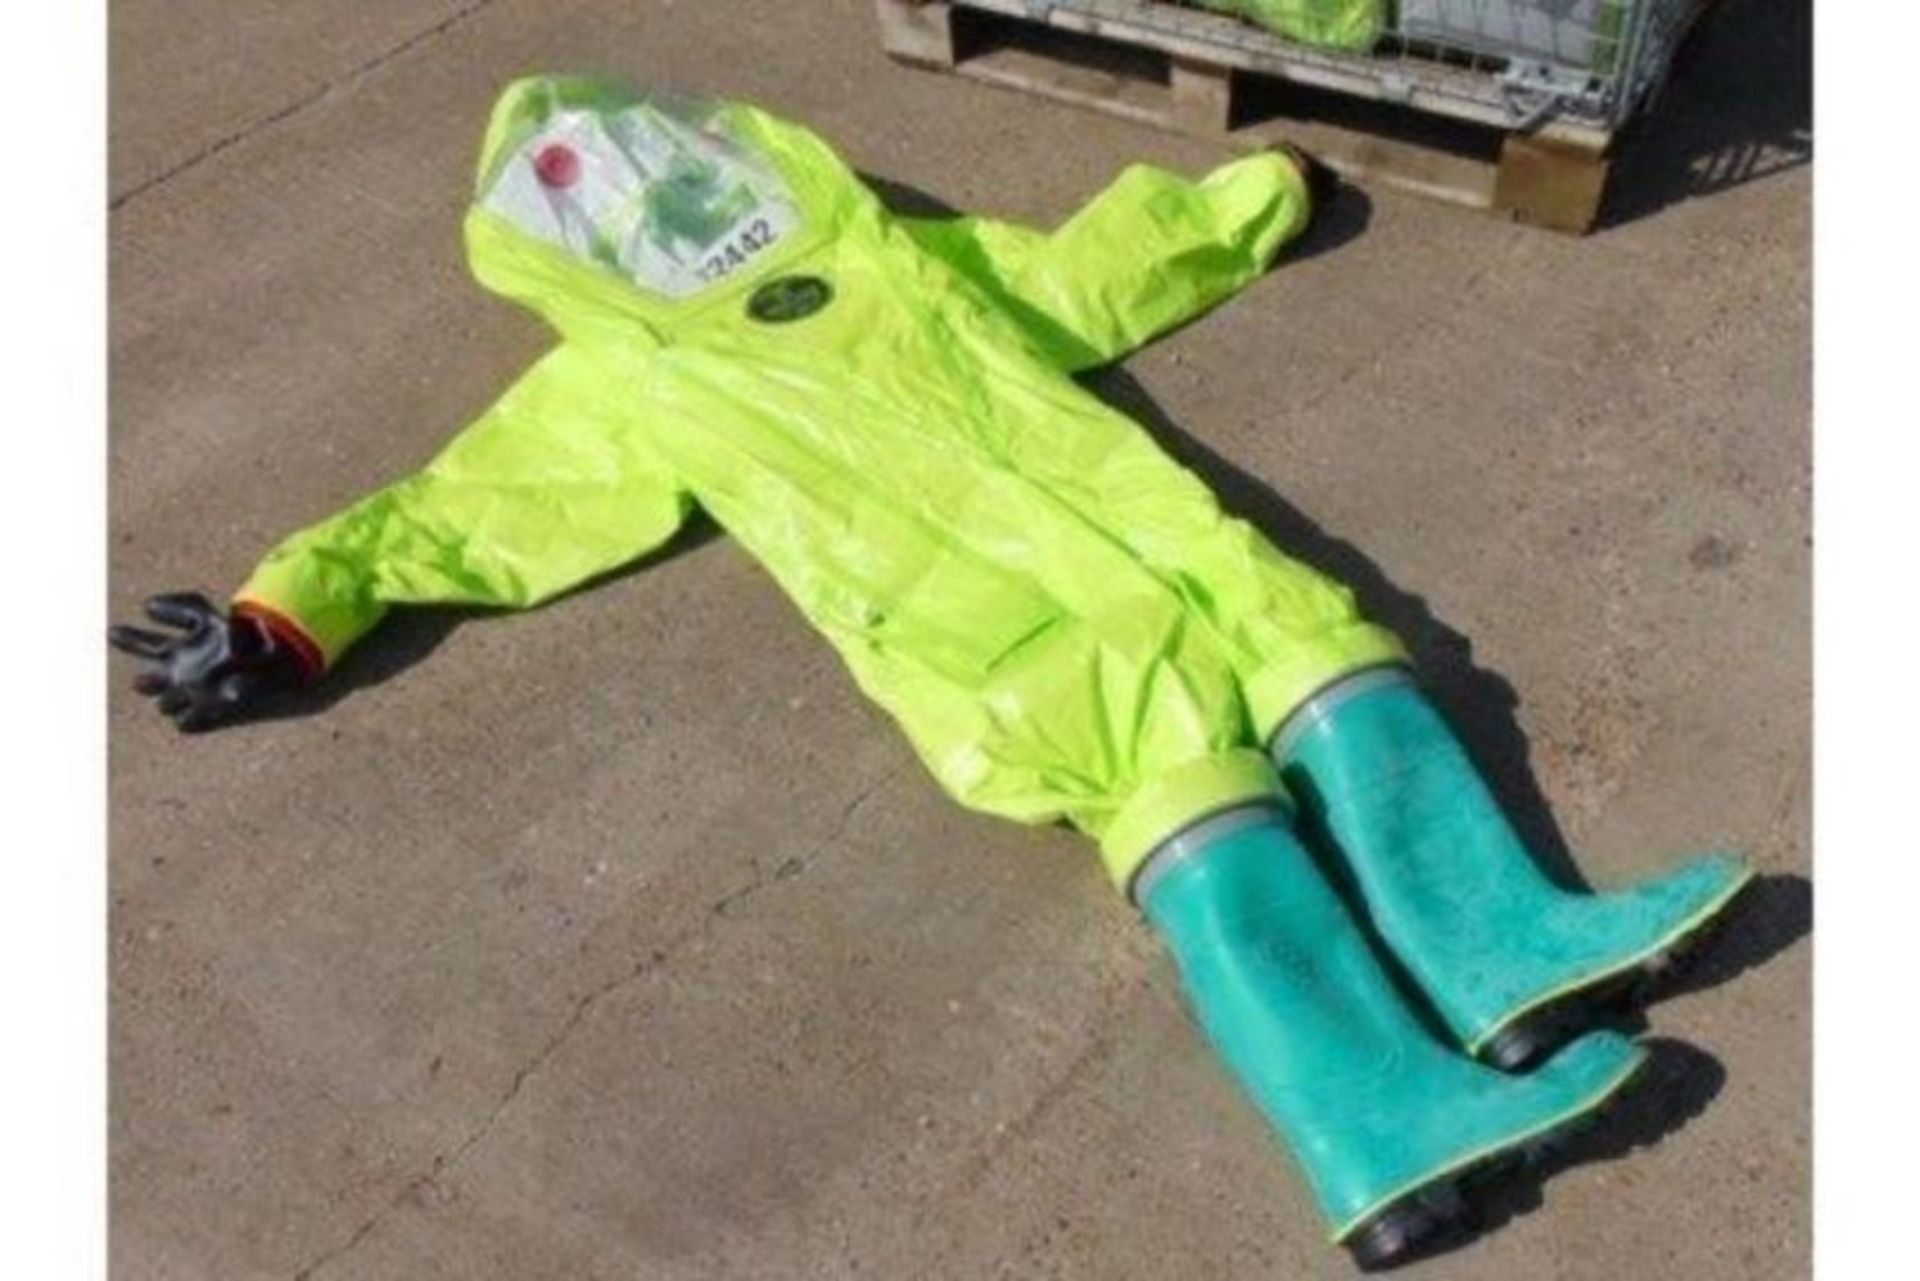 10 x Respirex Tychem TK Gas-Tight Hazmat Suit Type 1A with Attached Boots and Gloves - Image 4 of 9